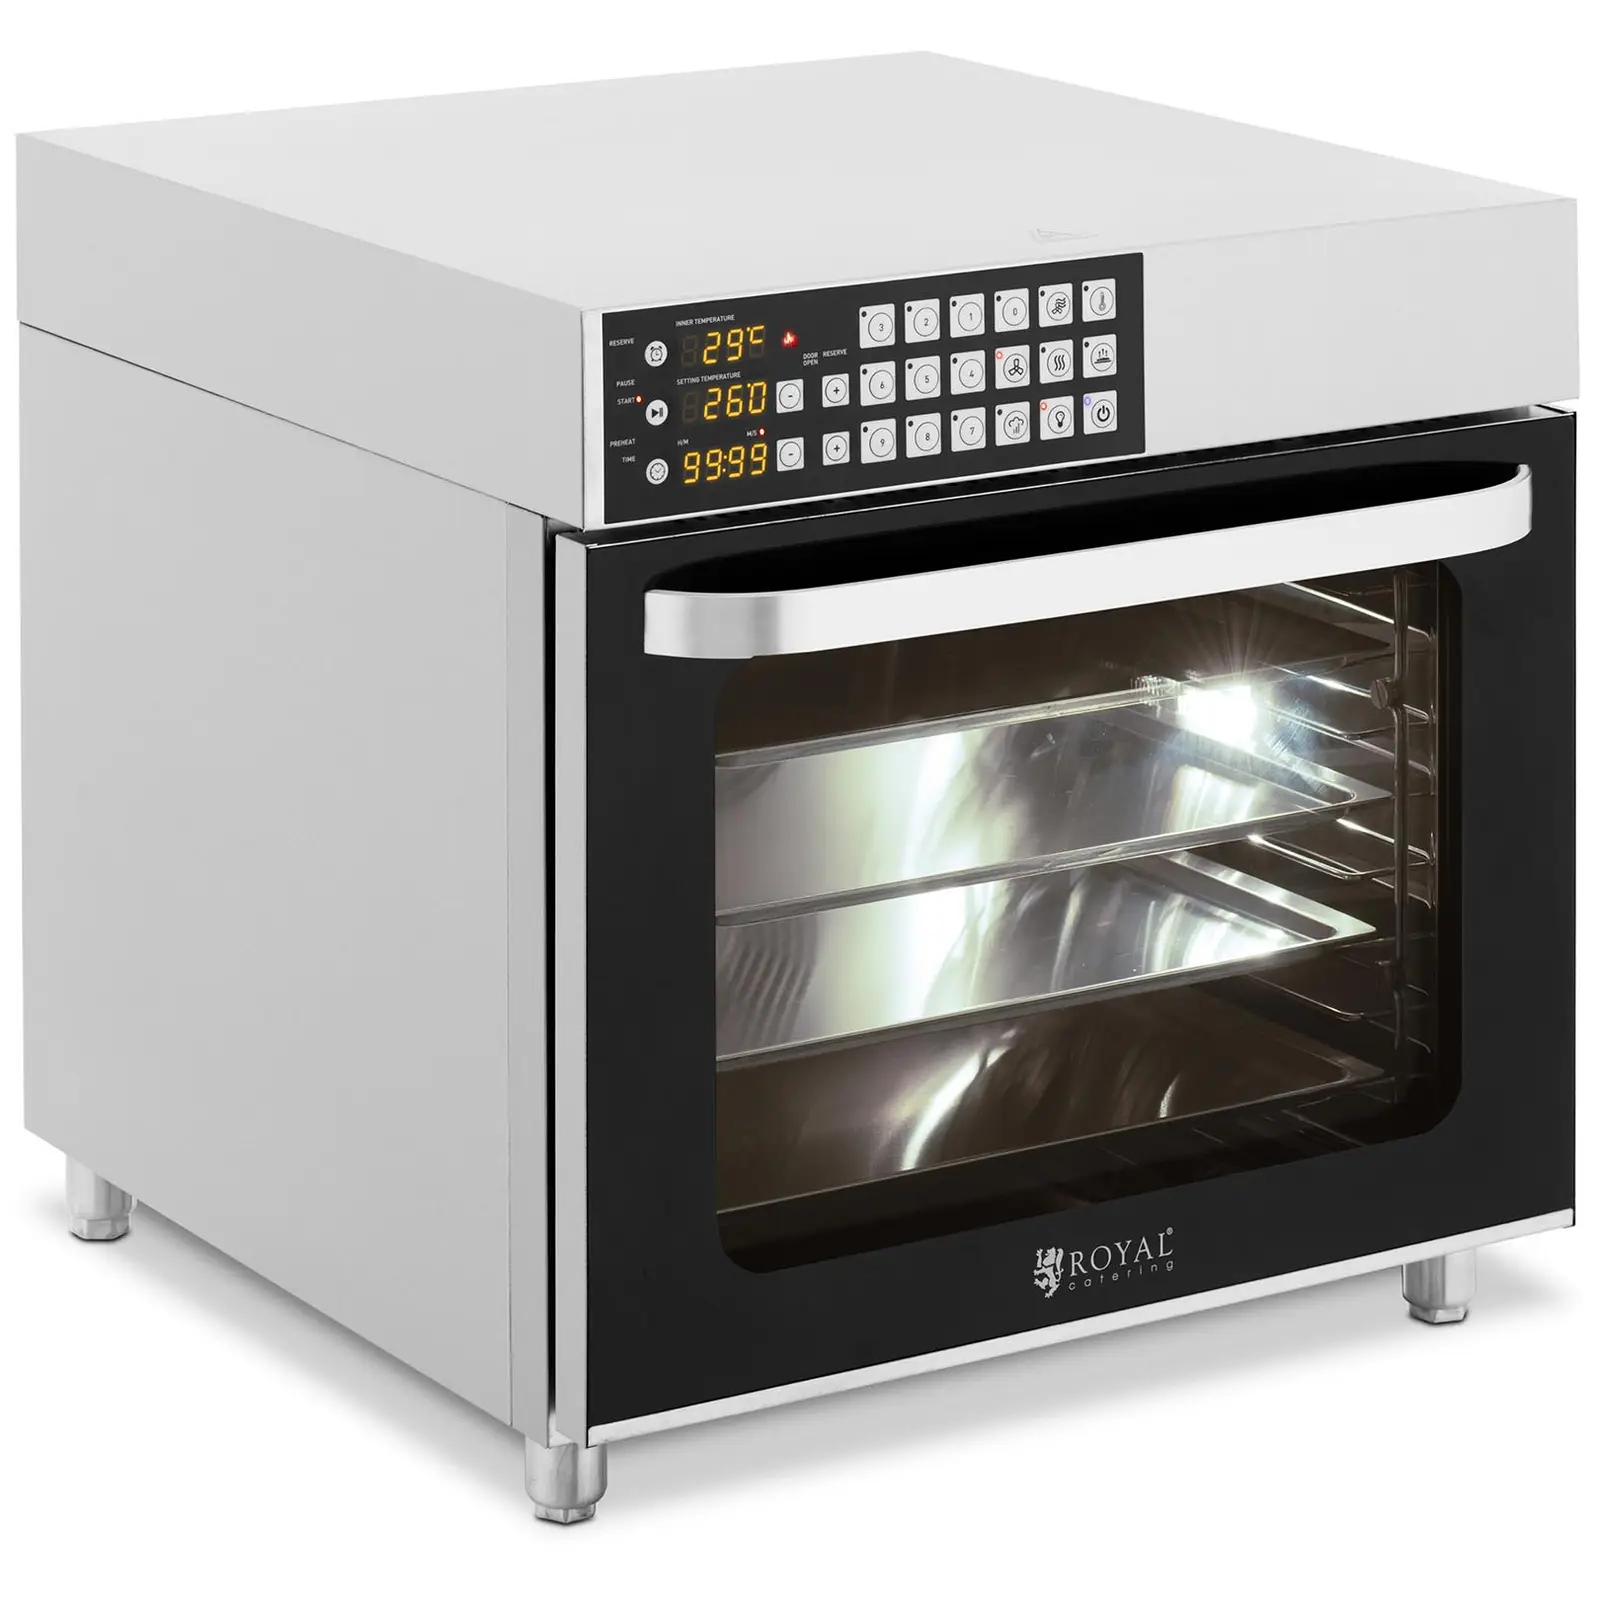 Hot air oven - 2800 W - Timer - 6 functions - 4 Trays